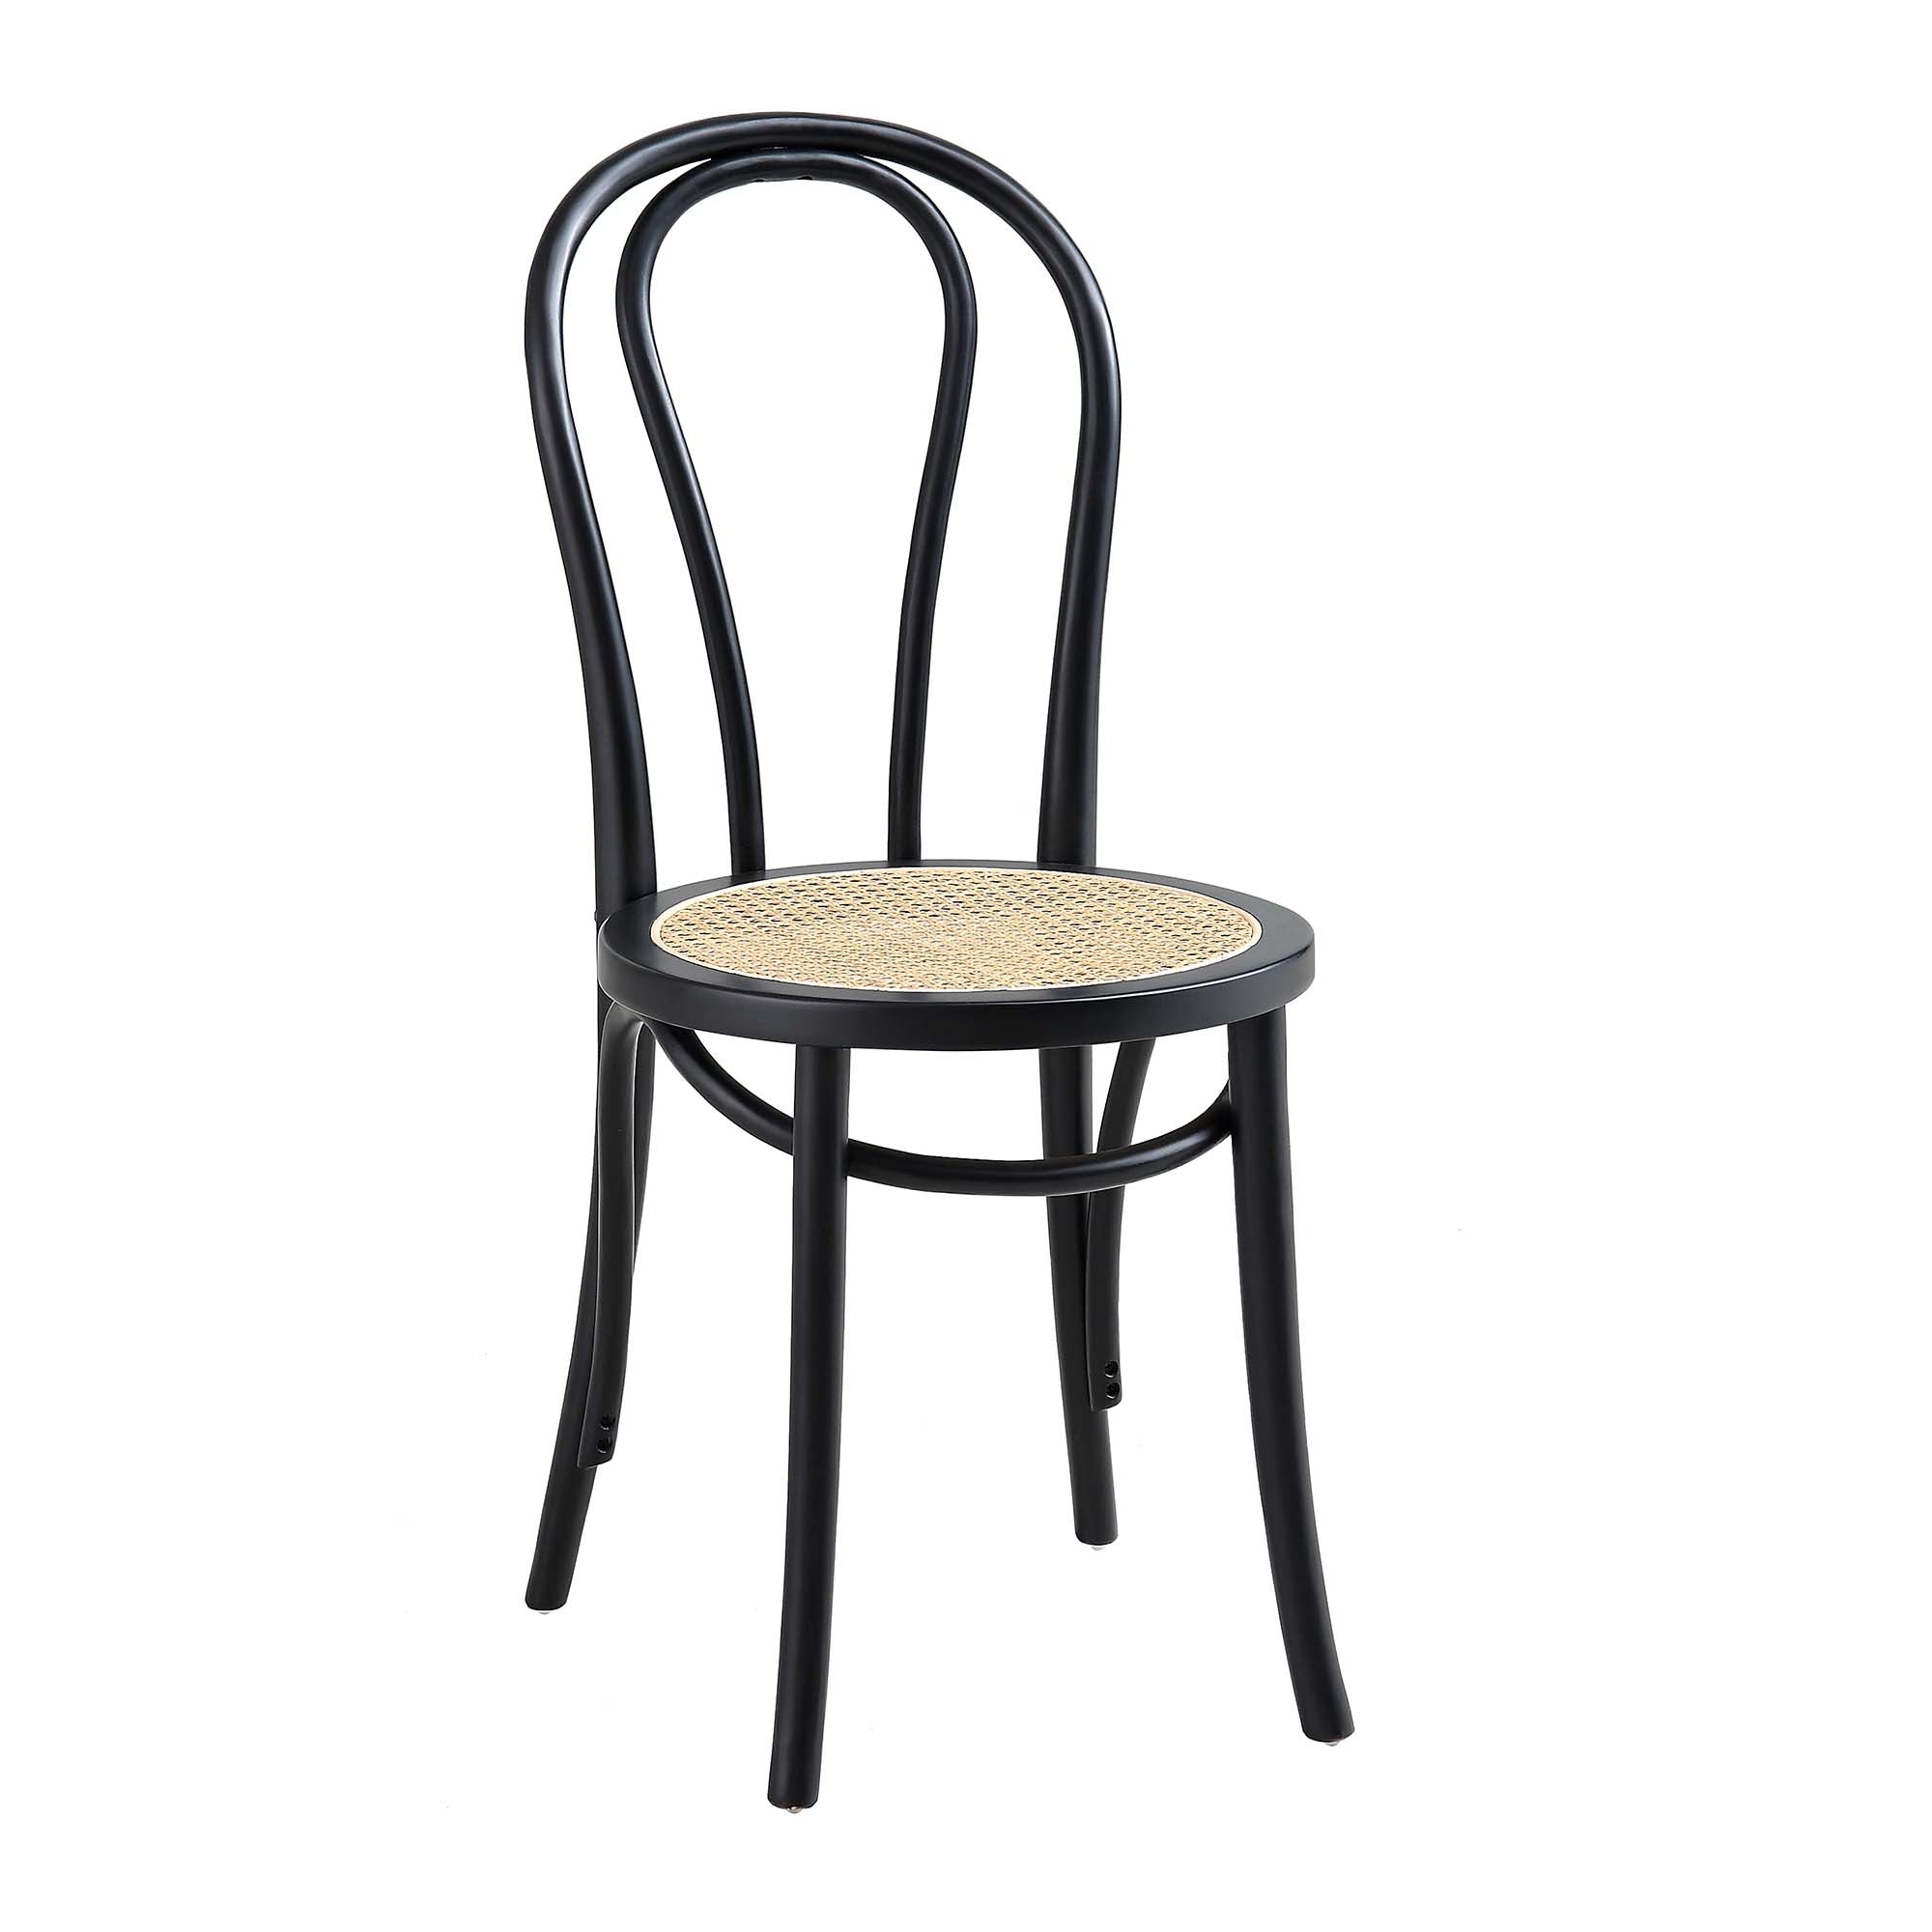 Camille Elm Wood and Rattan Bentwood Dining Chair, Black